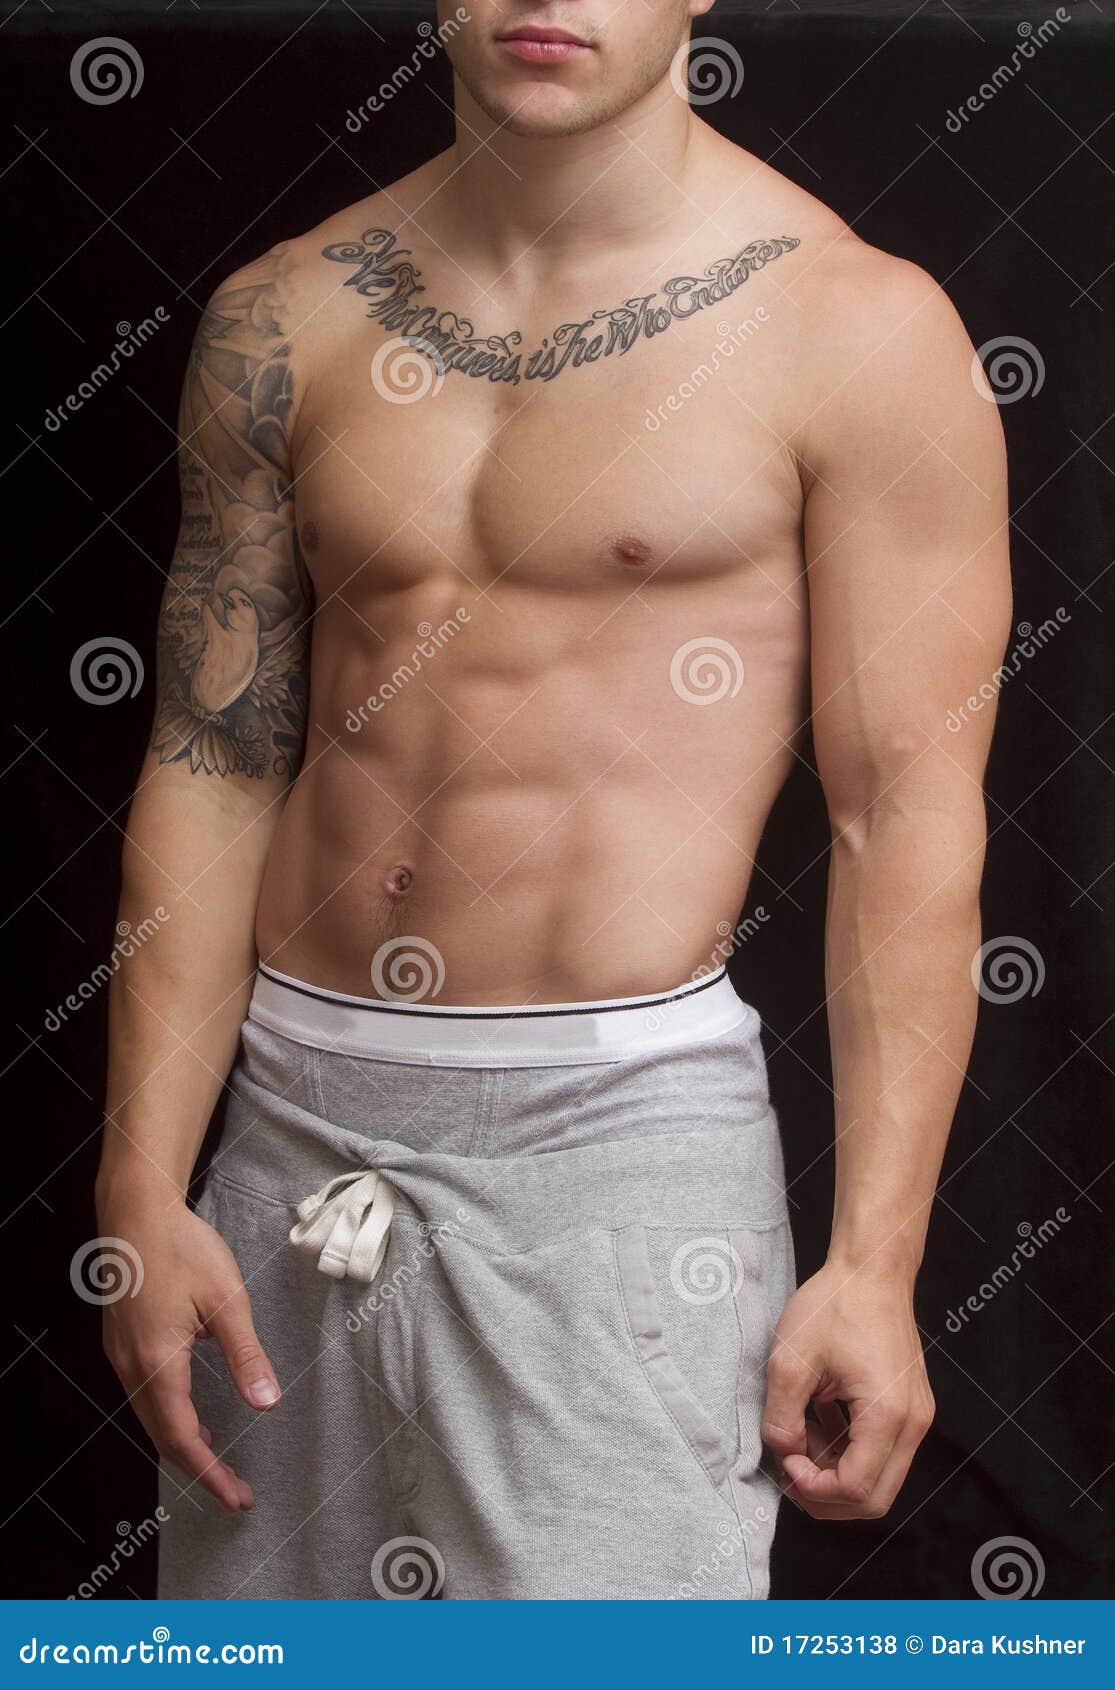 Guy with Tattoos stock photo. Image of groin, nipple - 17253138